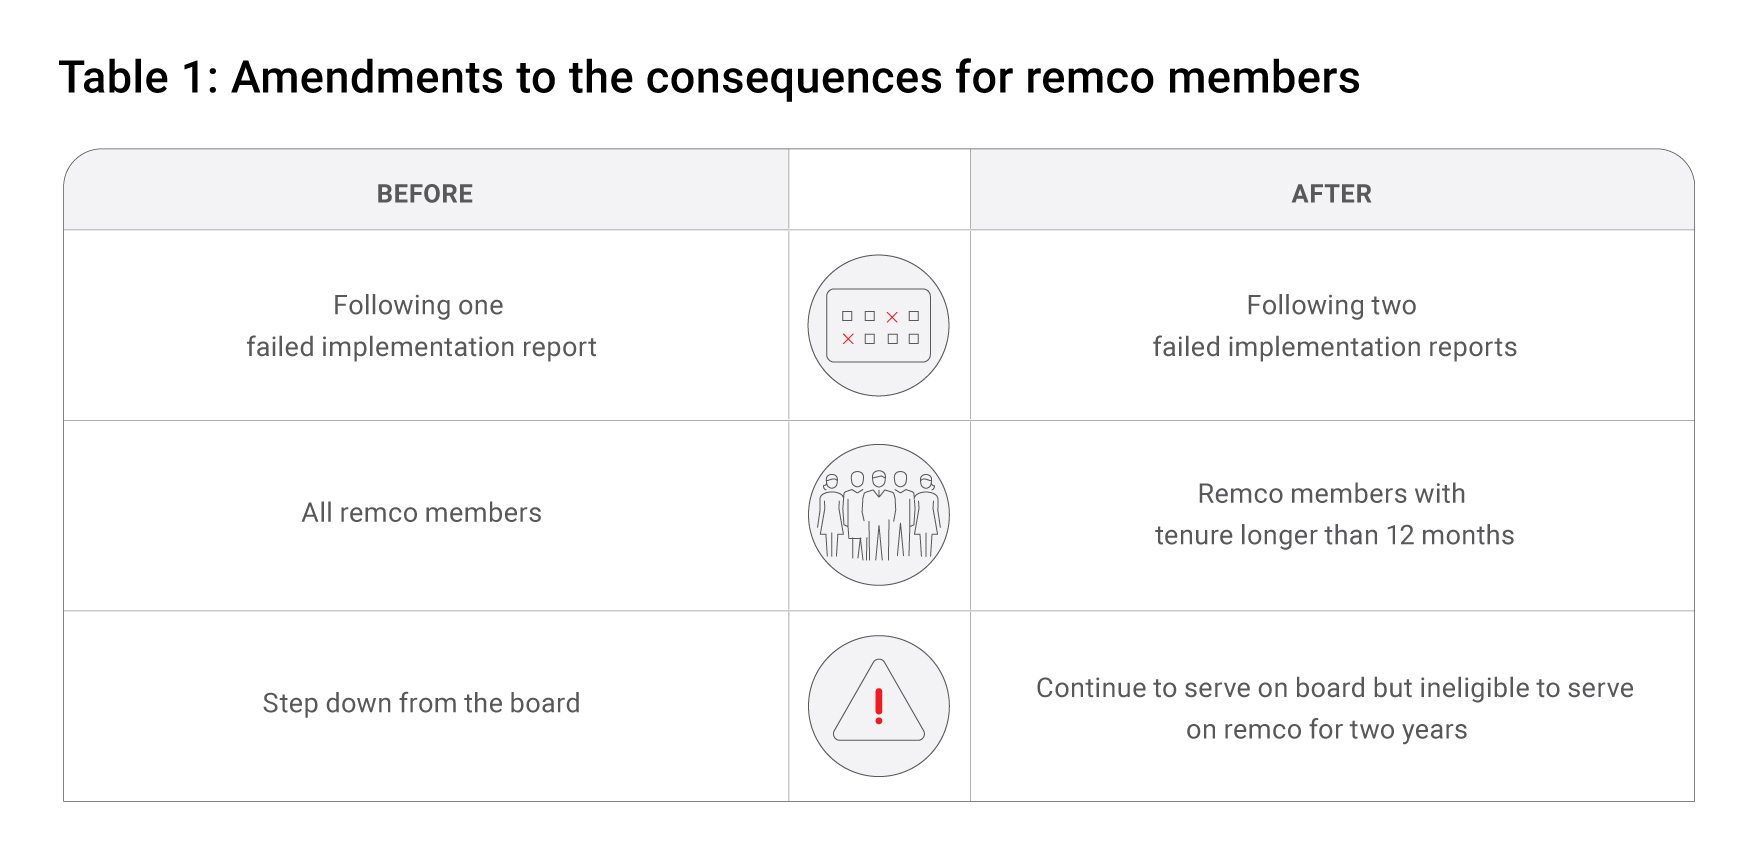 Table-1-amendments-to-the-consequences-for-remco-members.jpg